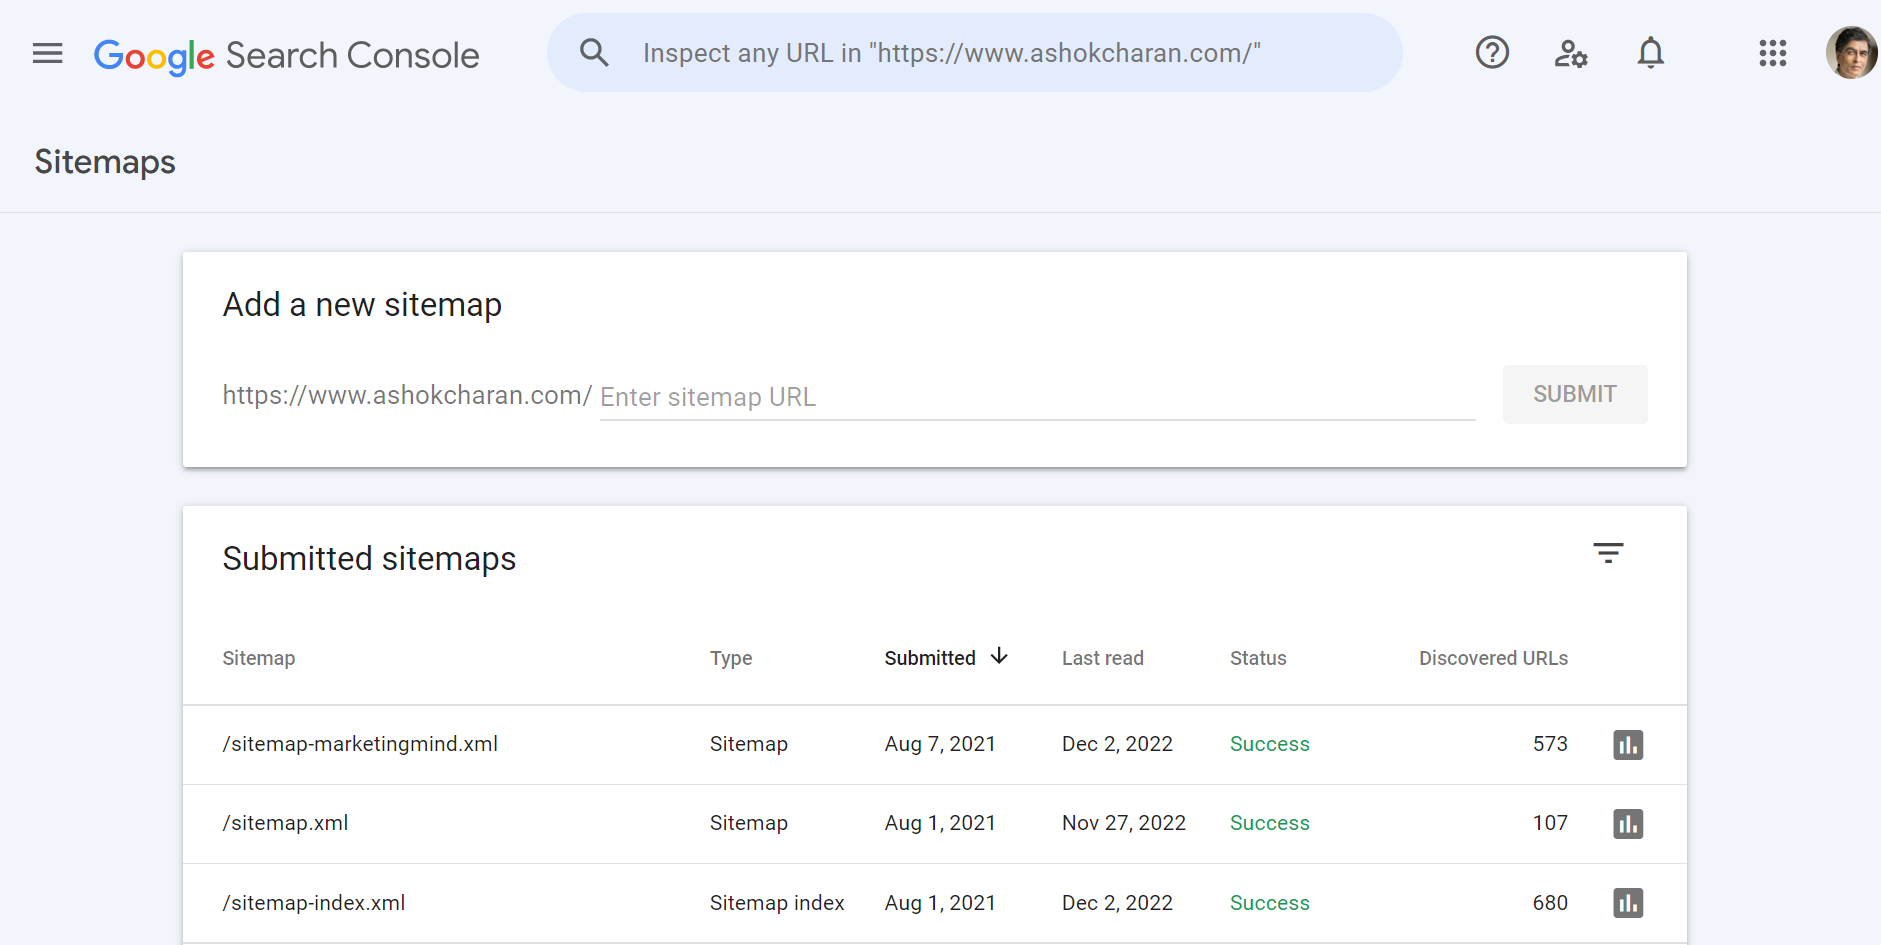 Submission of sitemap via Google’s Search Console - SEO